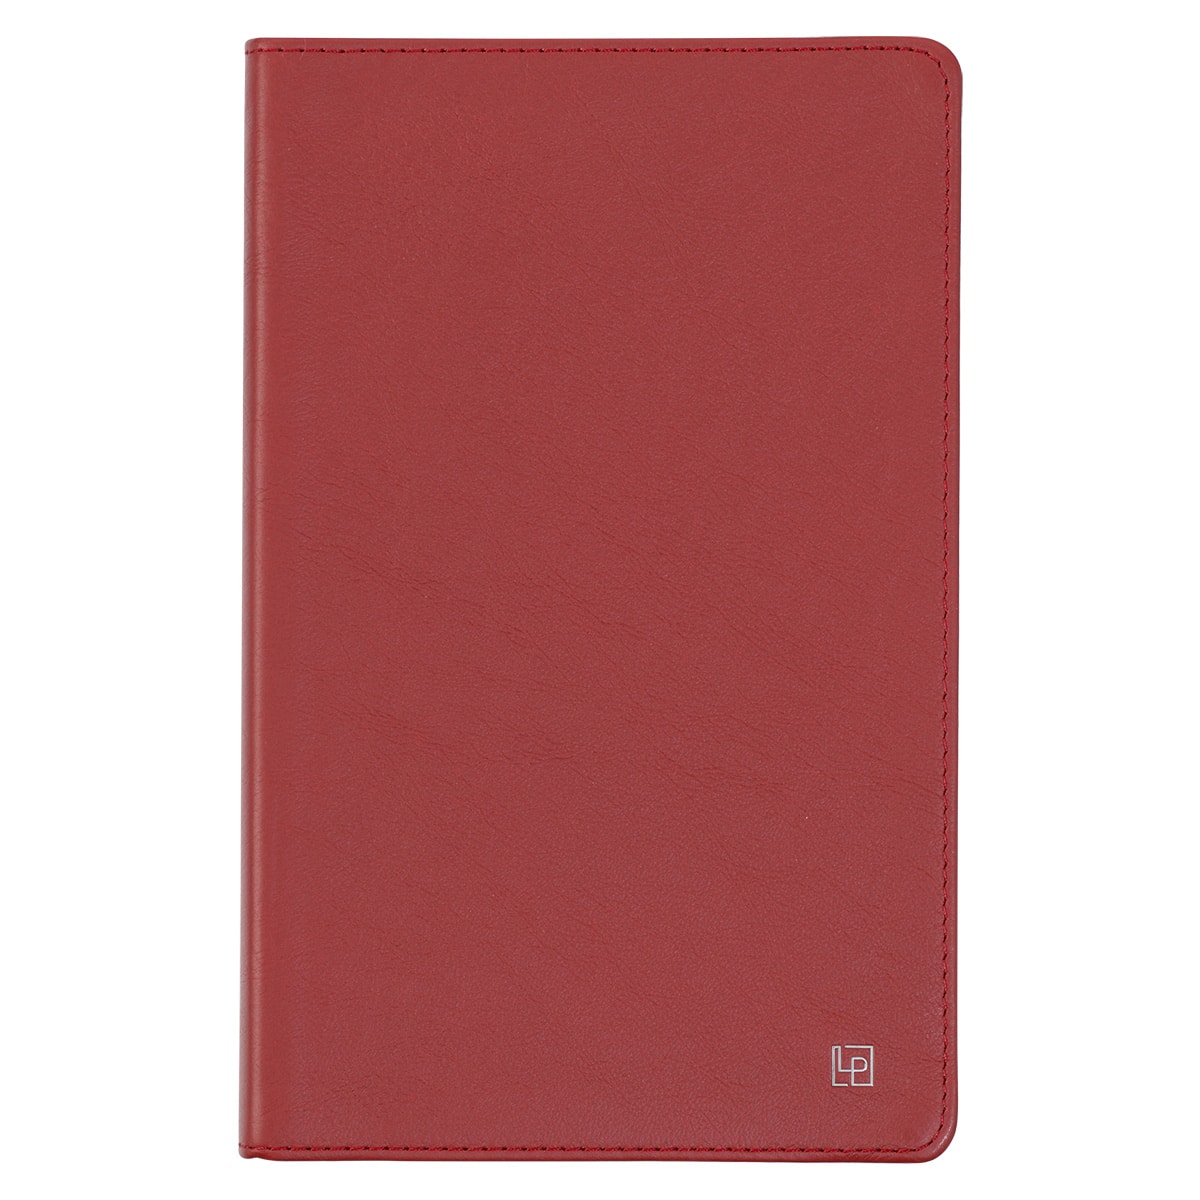 Britannica Red Leather Journal